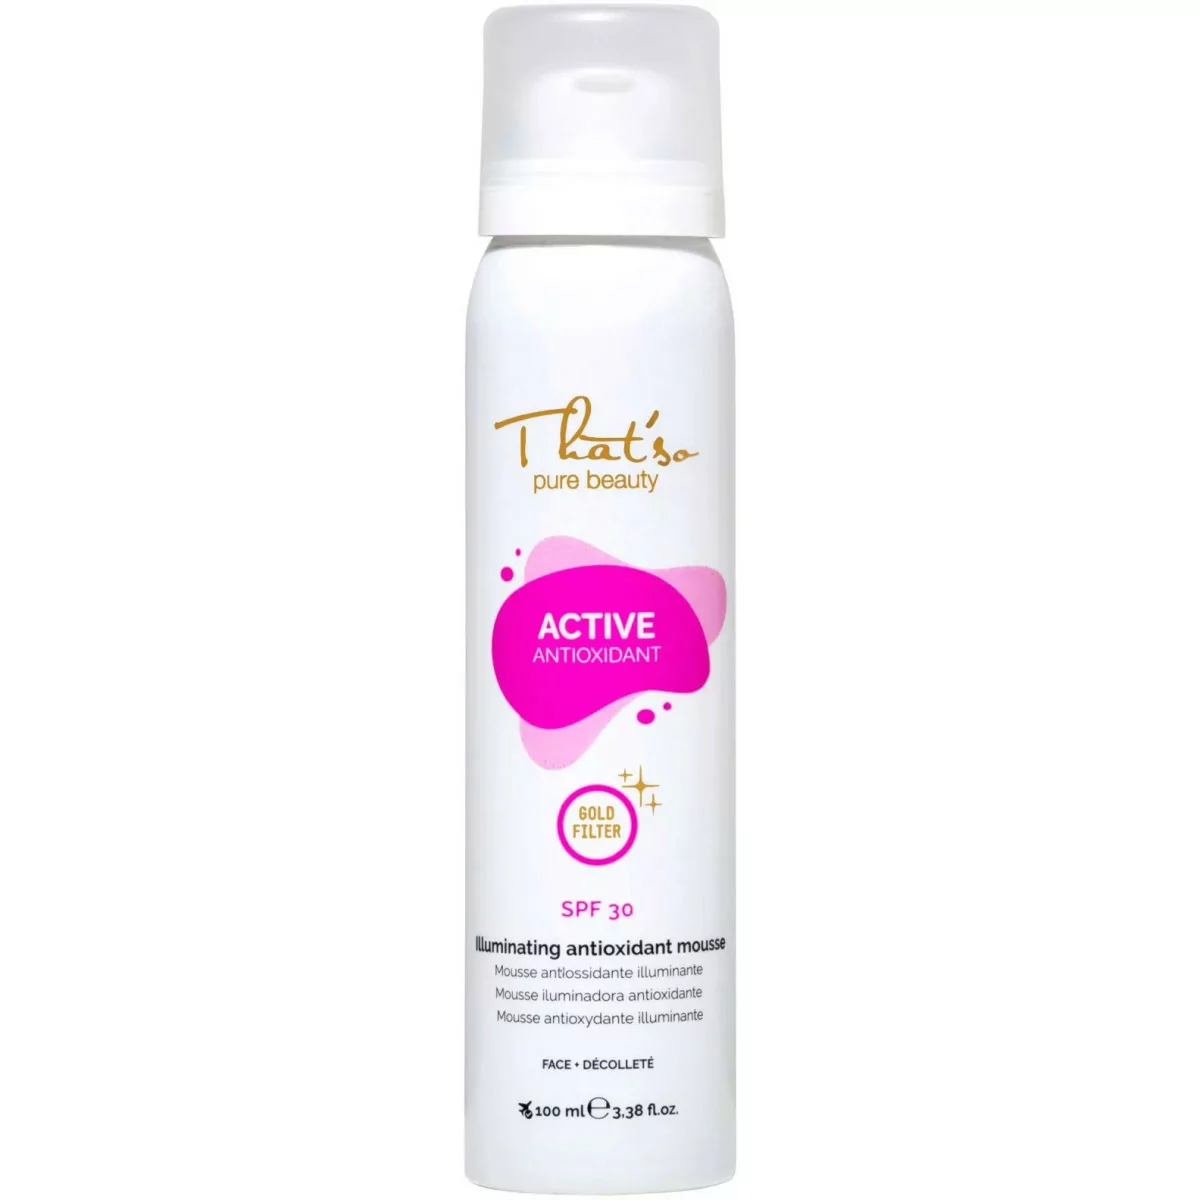 Pure Beauty Active Antioxidant SPF 30 667400 fra That'so